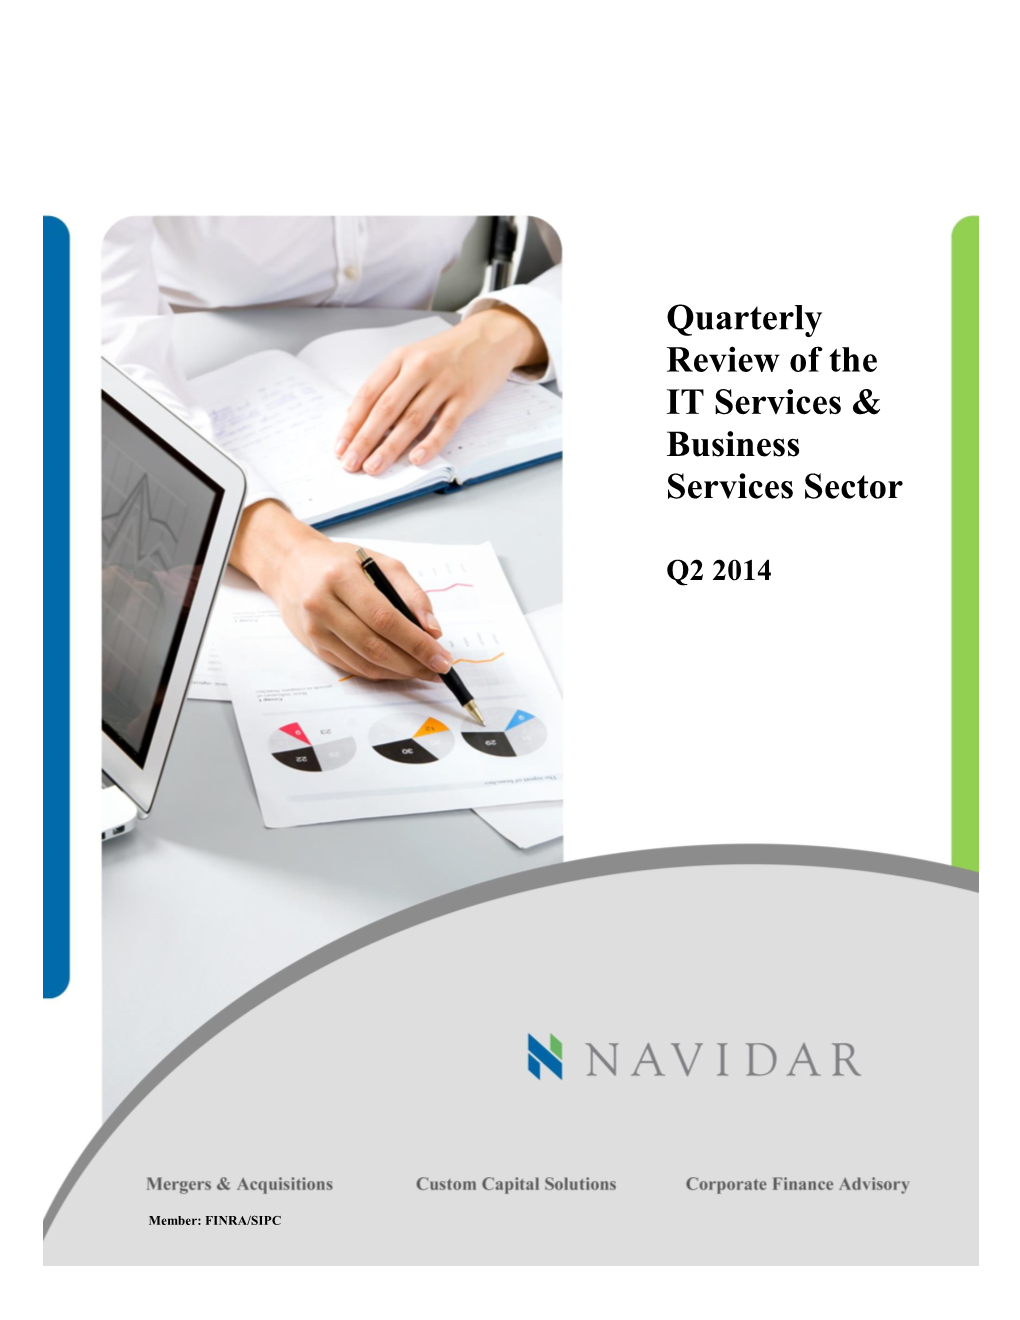 Quarterly Review of the IT Services & Business Services